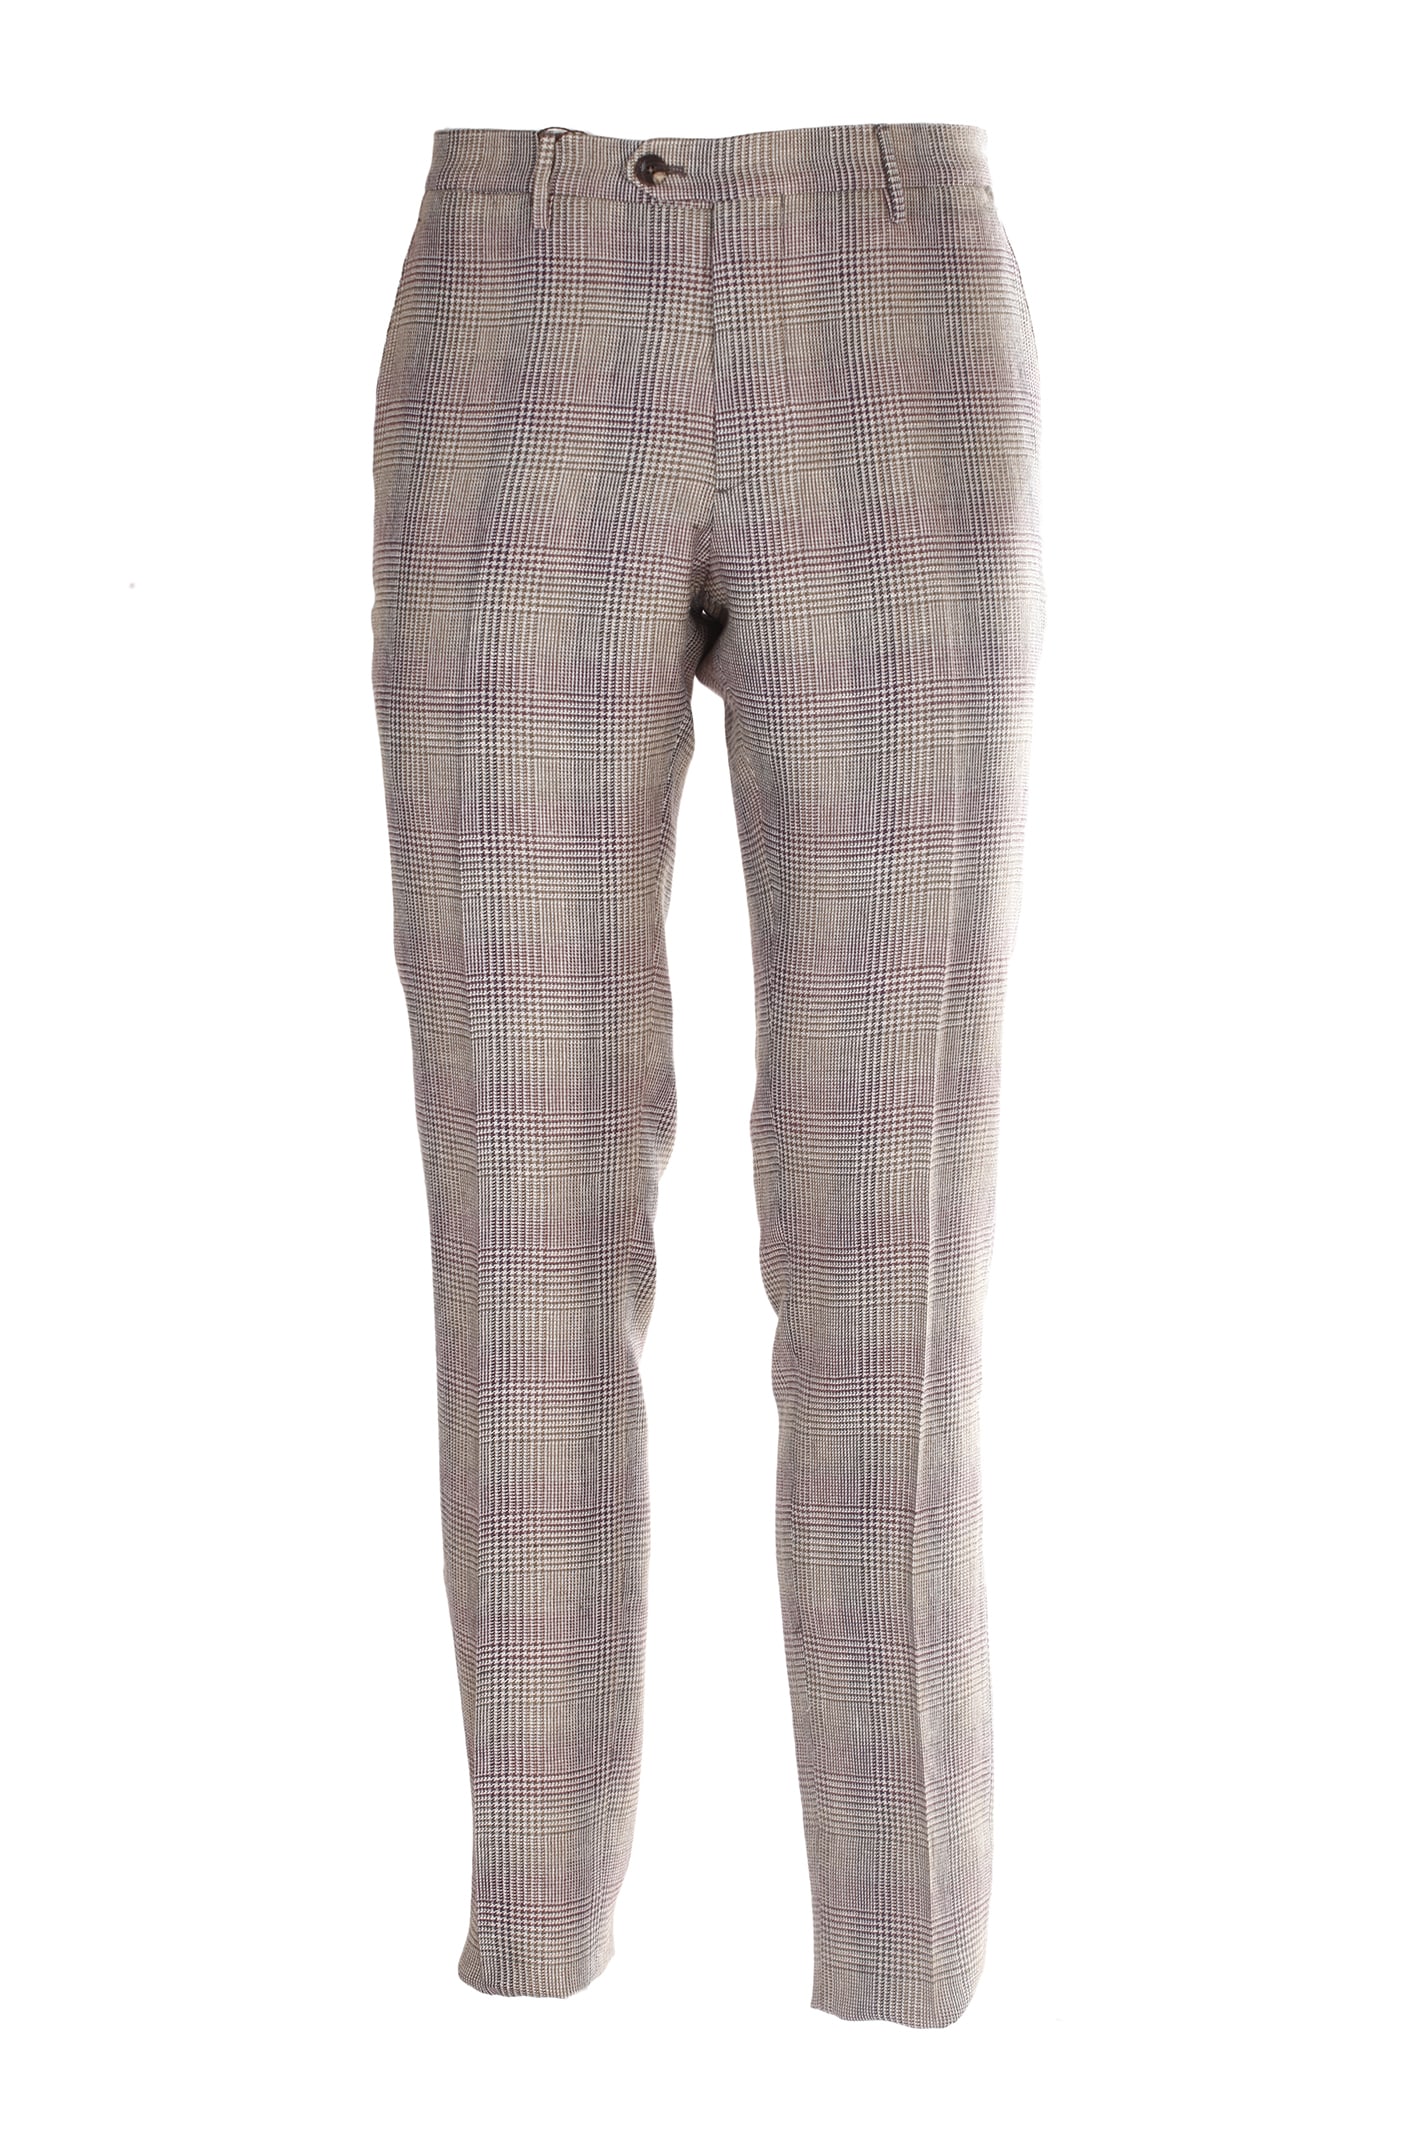 Etro trousers, prince of wales,